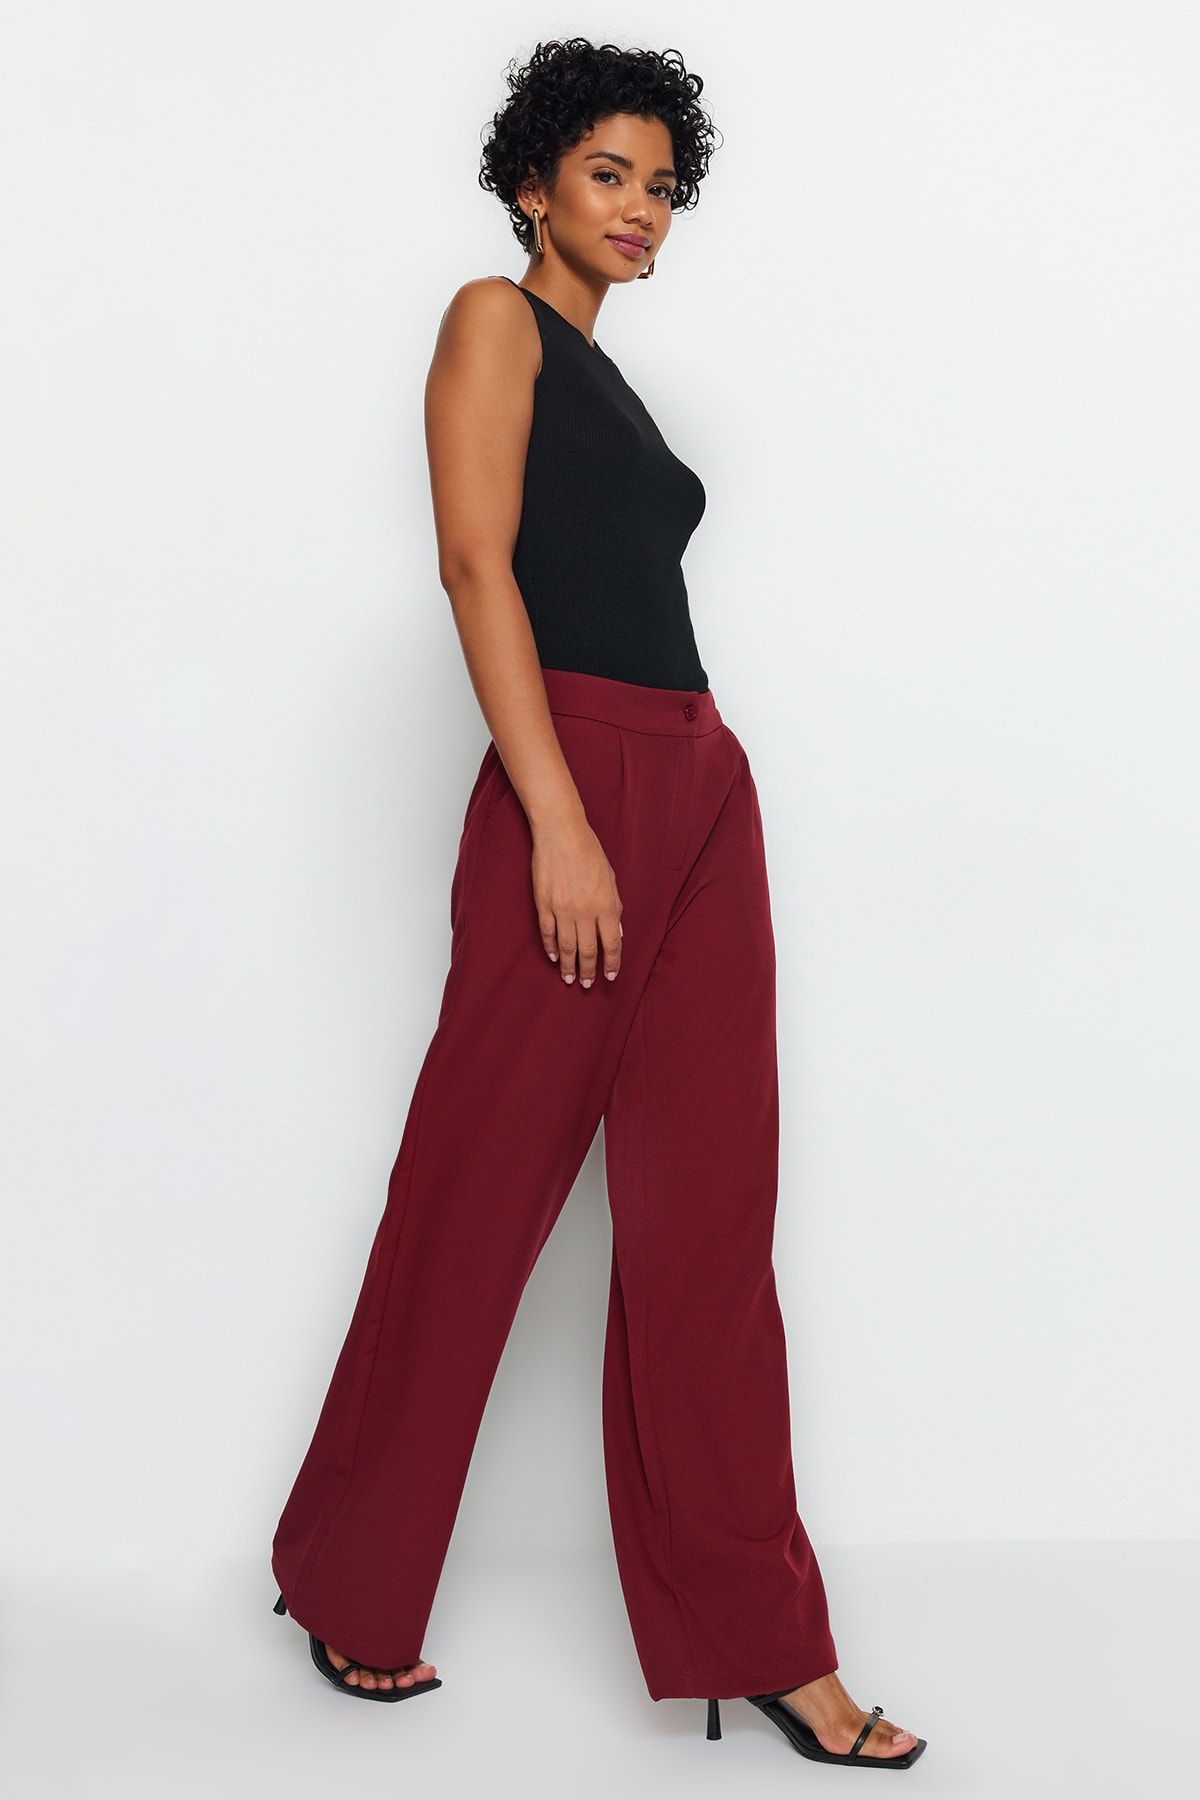 Fablestreet Trousers and Pants  Buy Fablestreet Livin Air Wide Leg Pants   Maroon Online  Nykaa Fashion